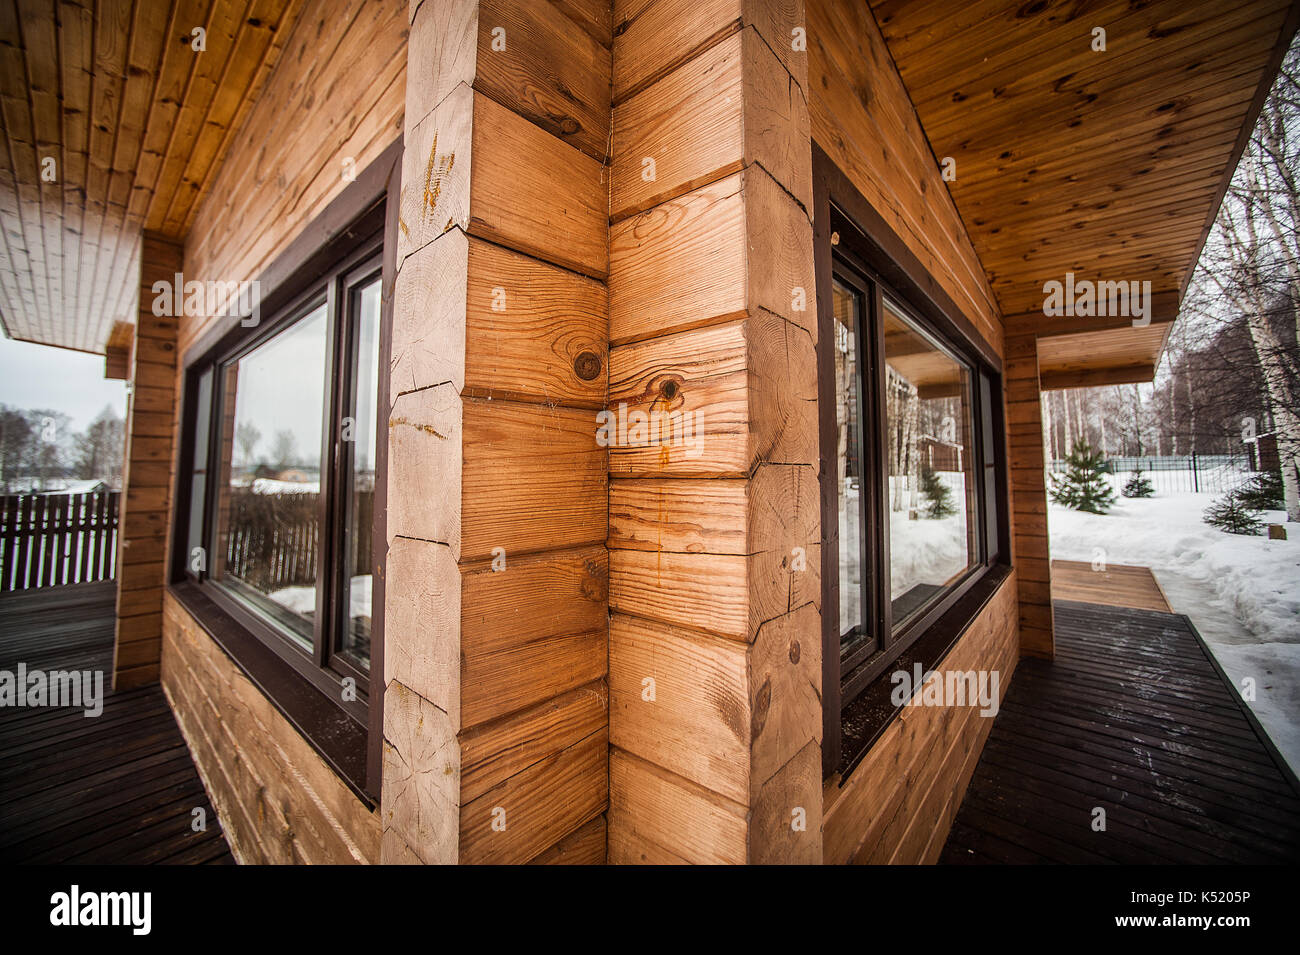 Window of a wooden house. in perspective view jf two windows Stock Photo